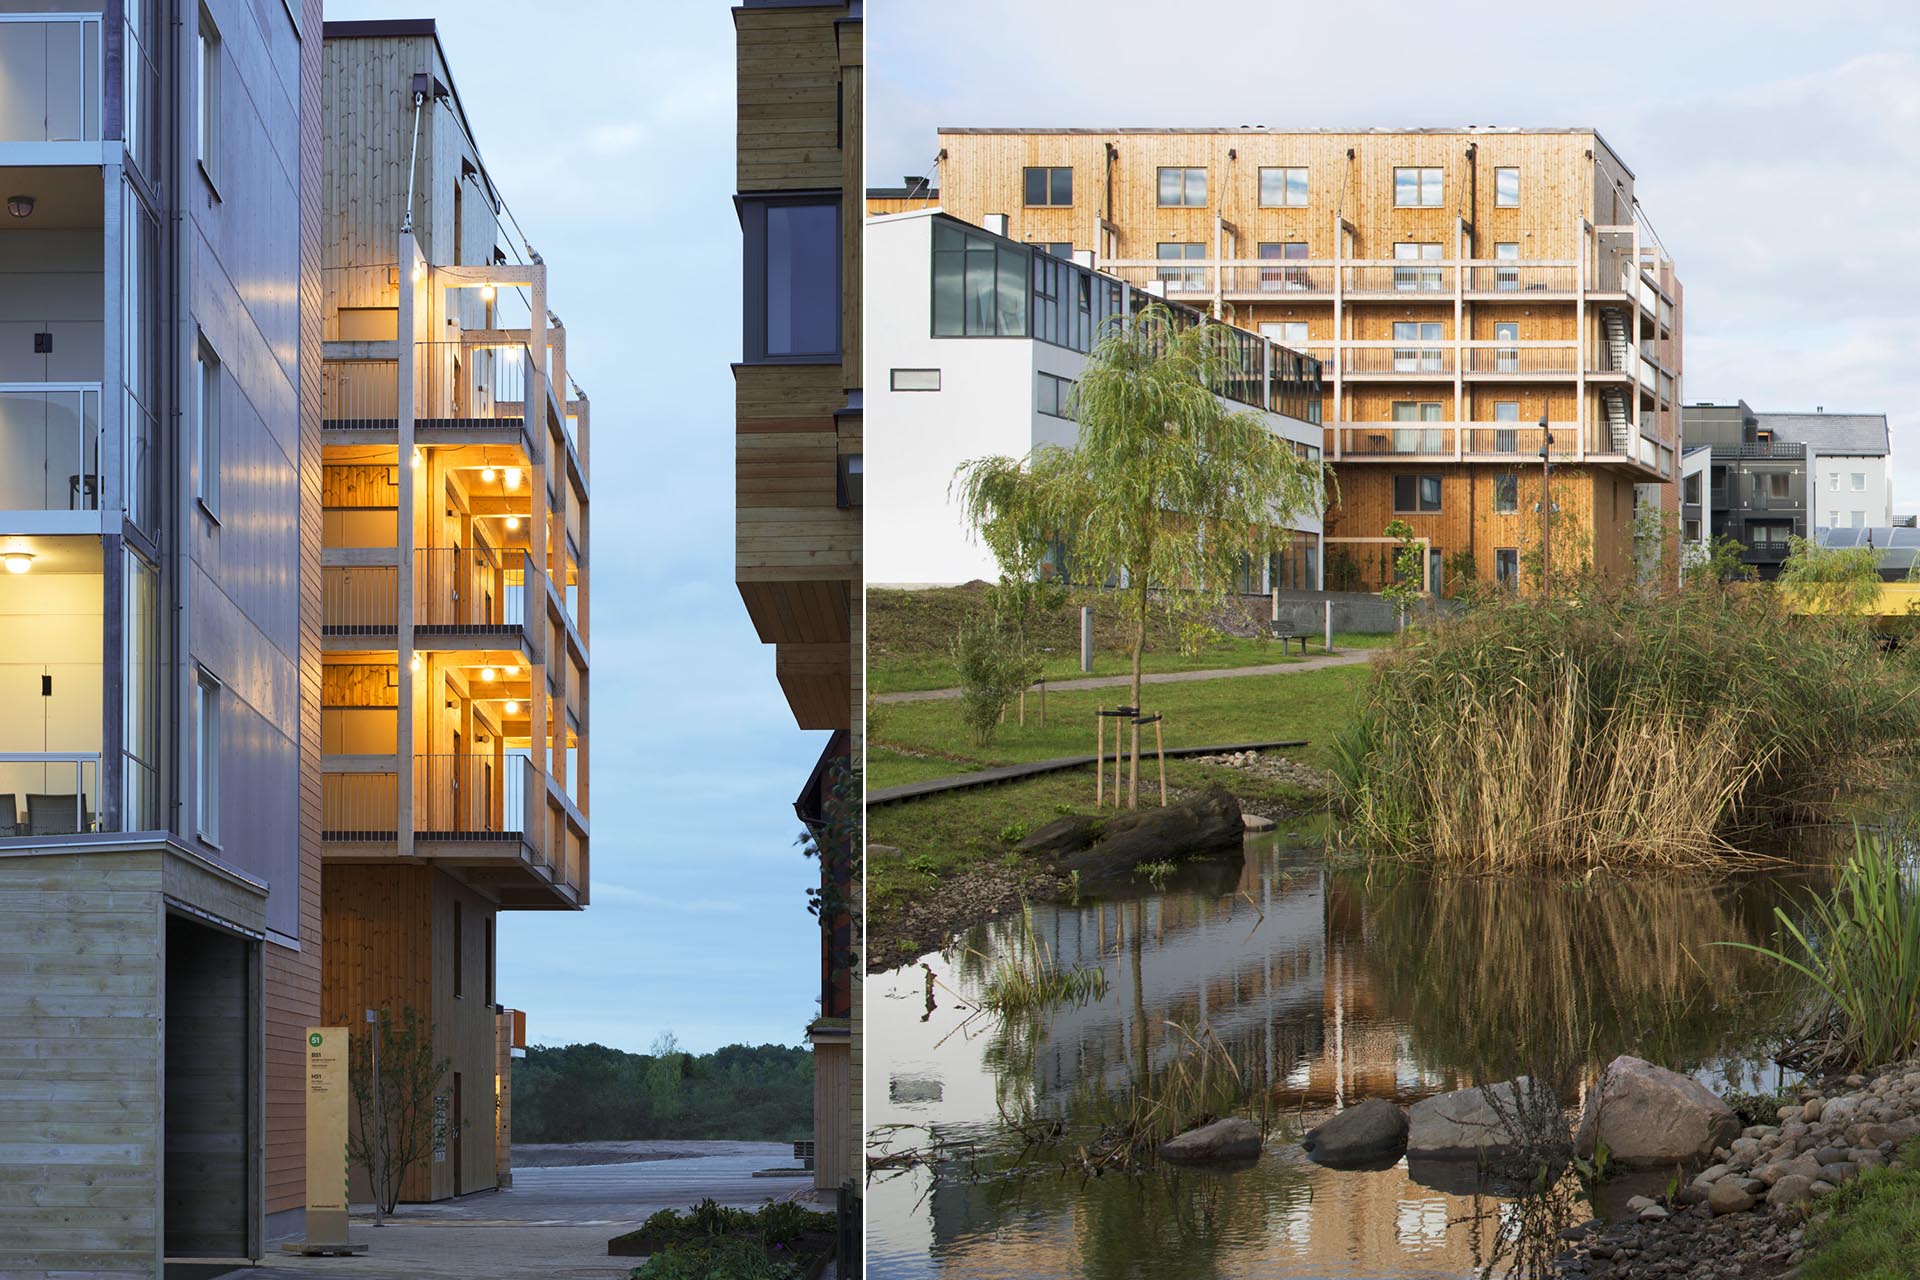 A block of flats made of wood behind a little pond with lots of plants.